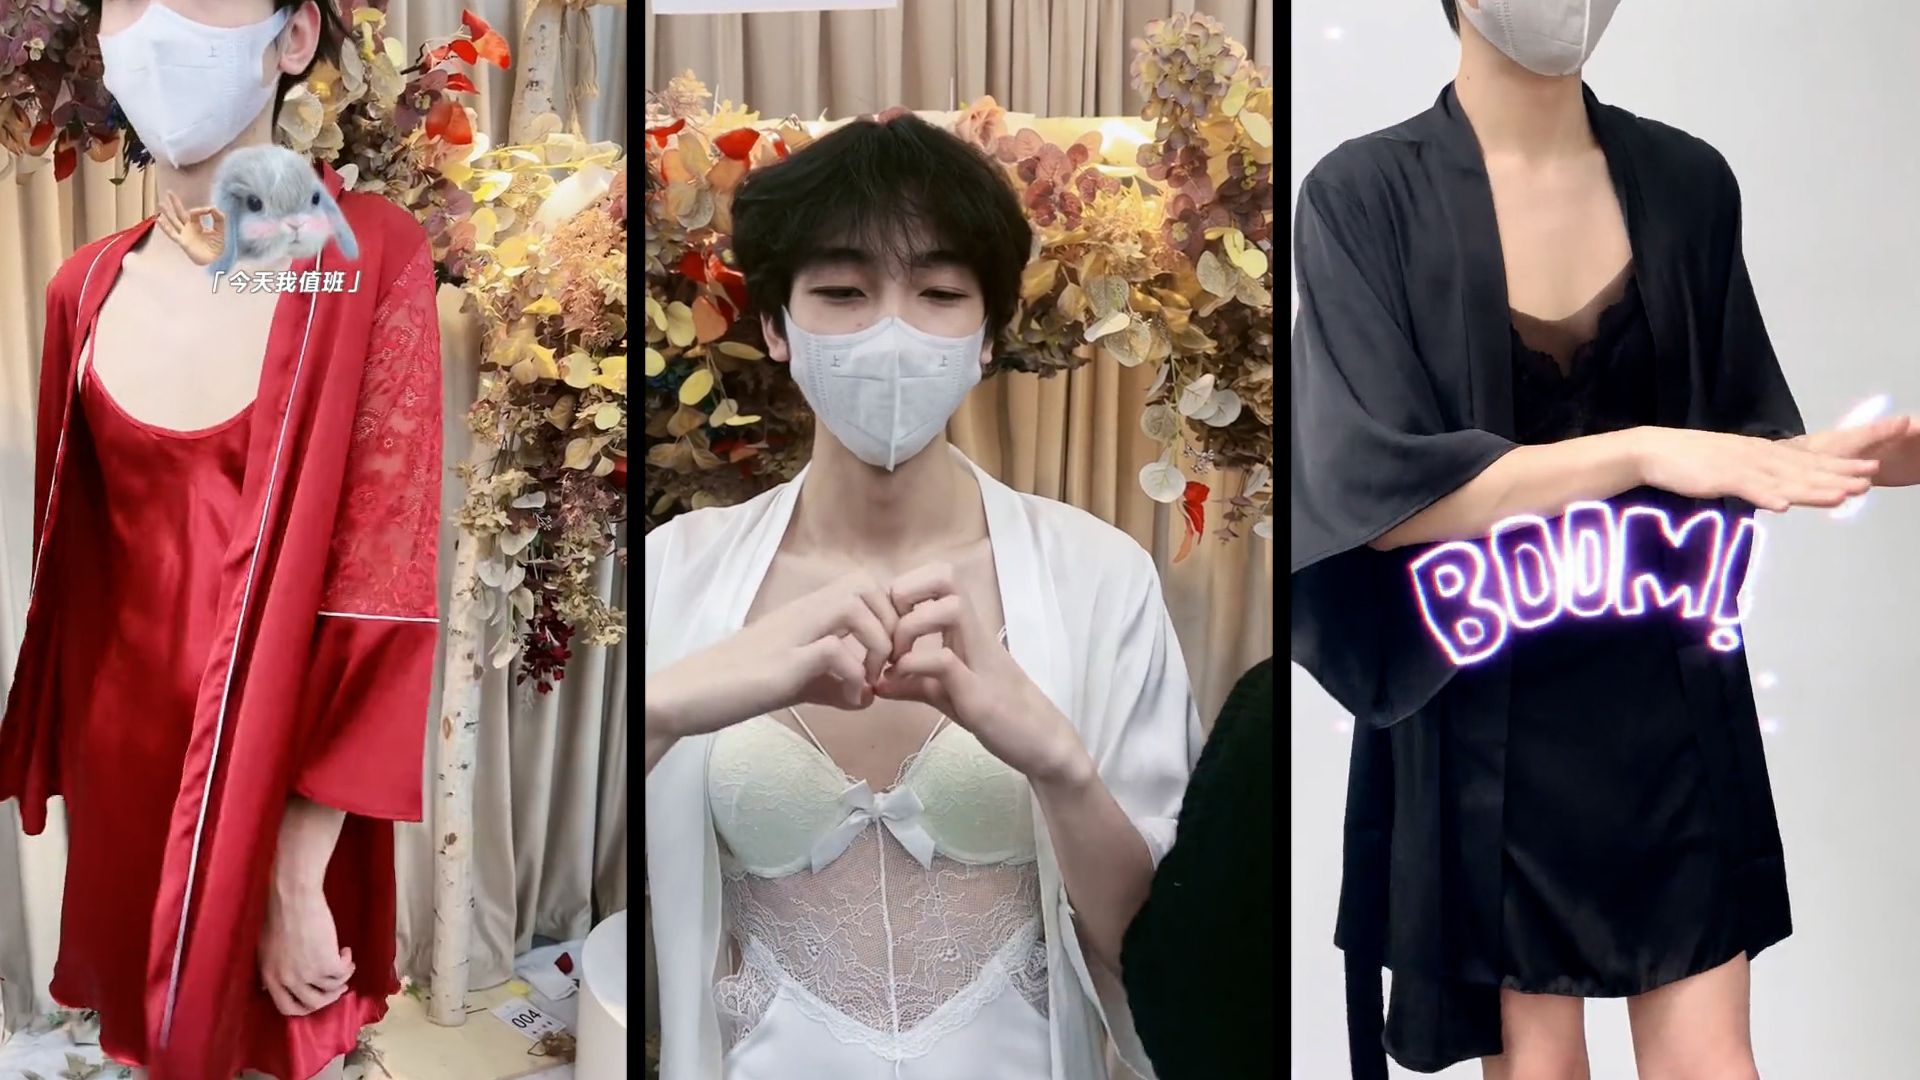 Men are modeling lingerie in China. Here's why